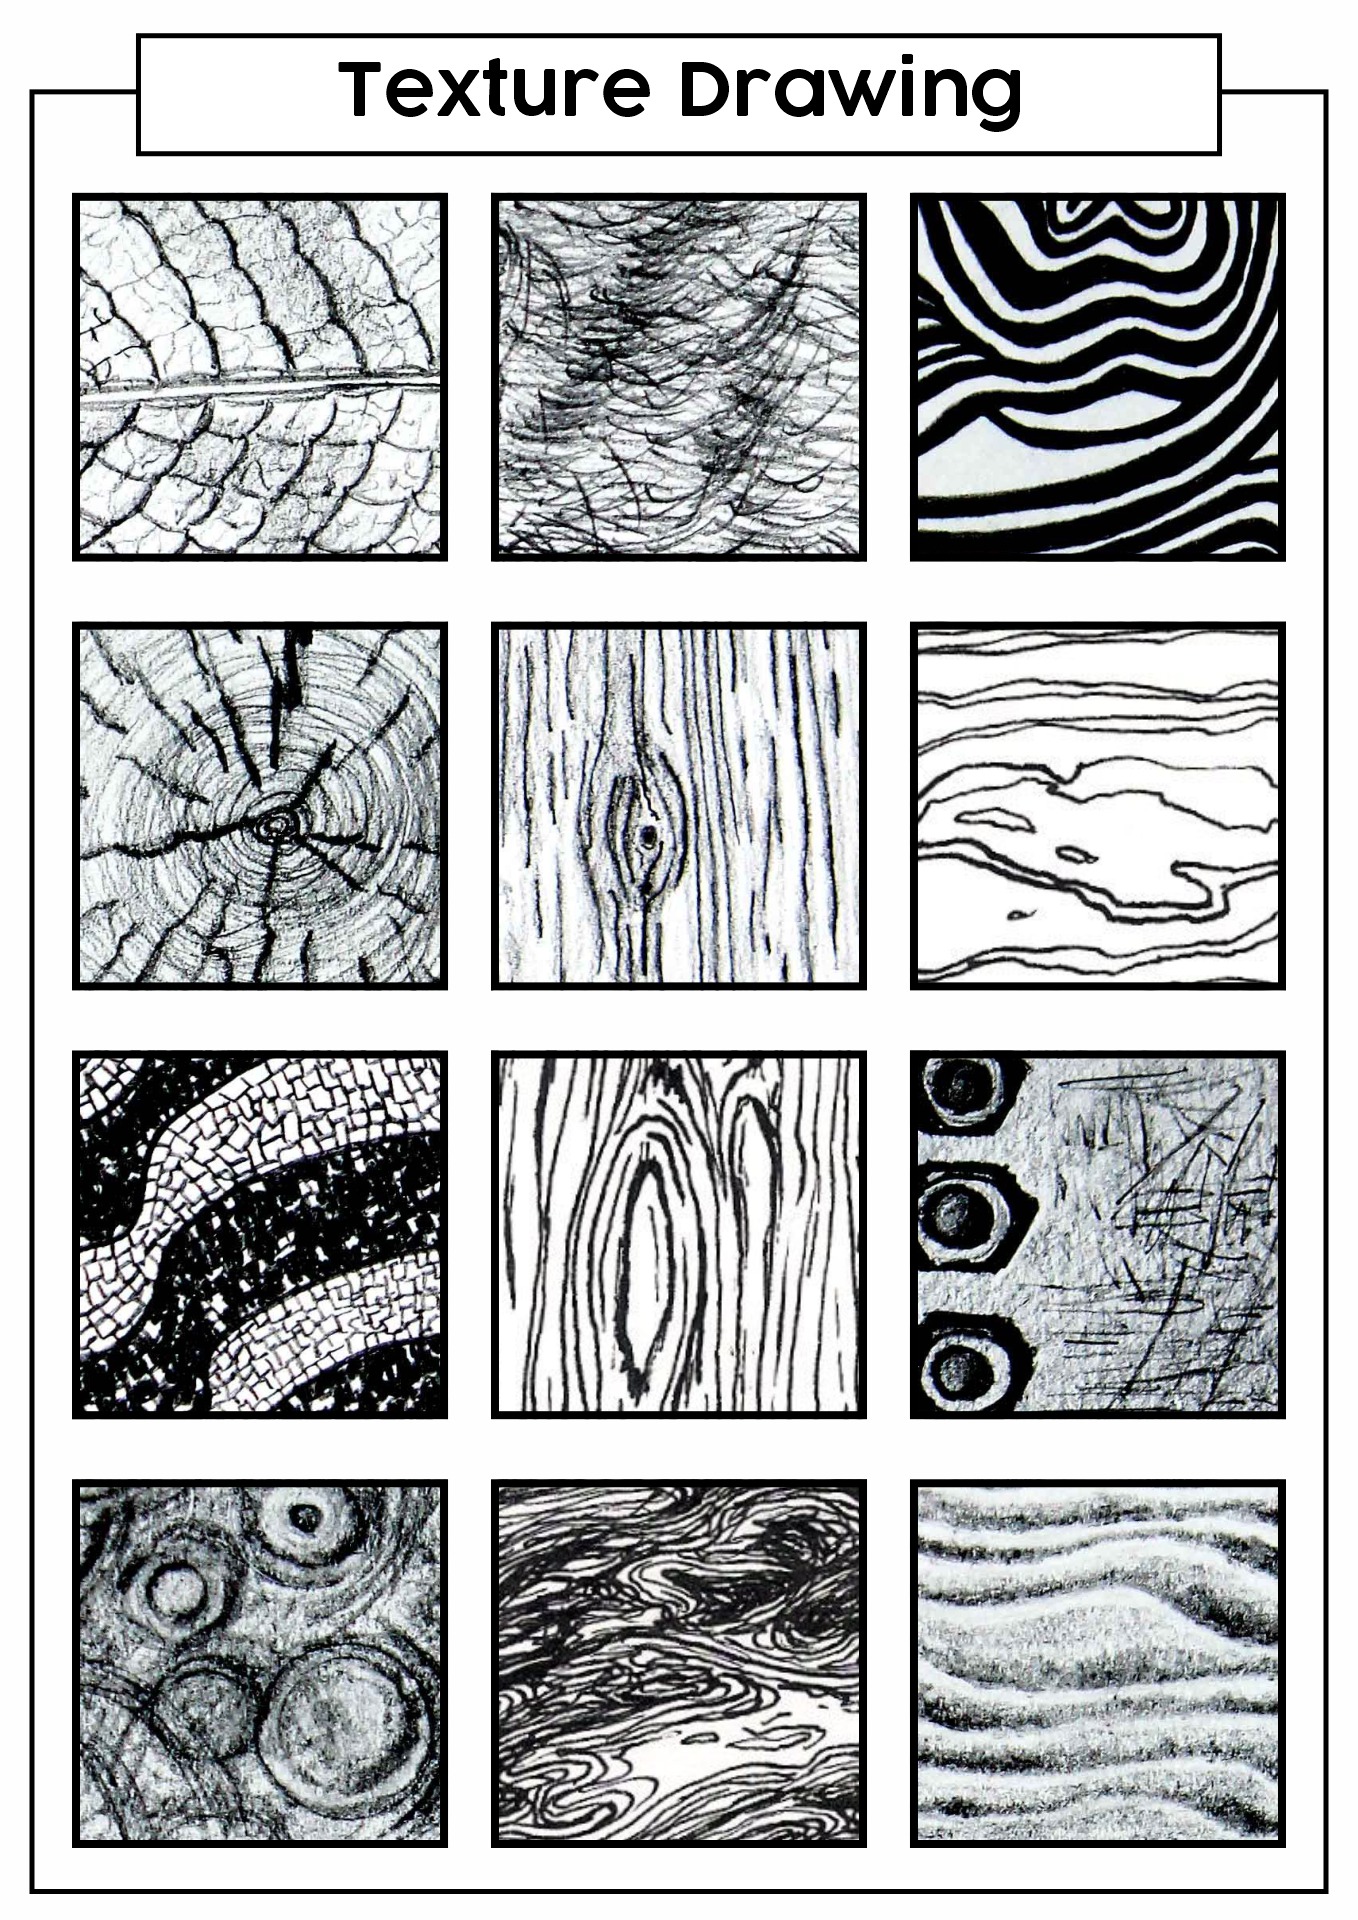 Texture Drawing Examples